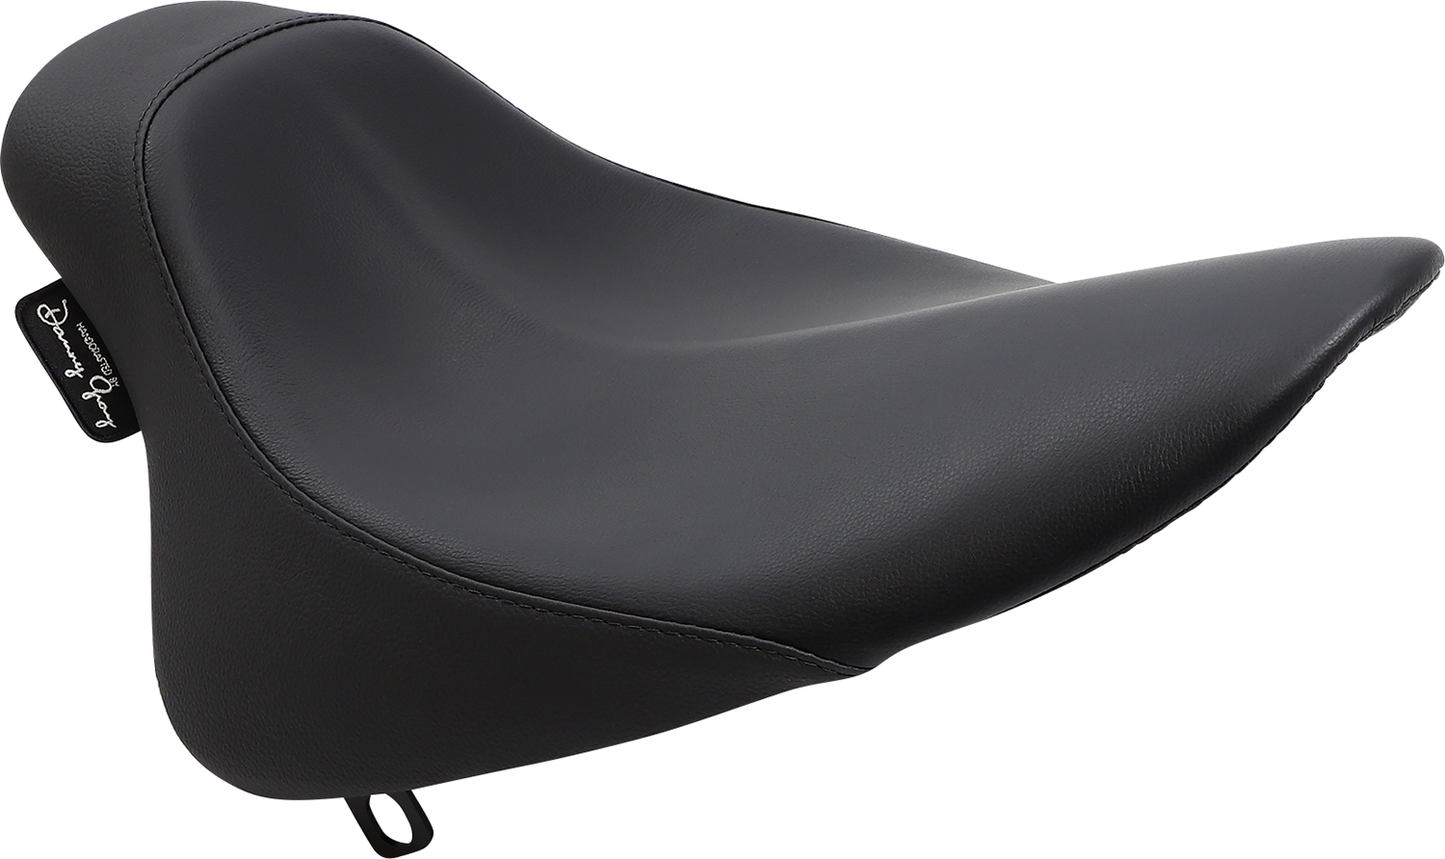 Danny Gray Black Buttcrack Leather Solo Seat fits 1984-1999 Harley Softail FLSTN